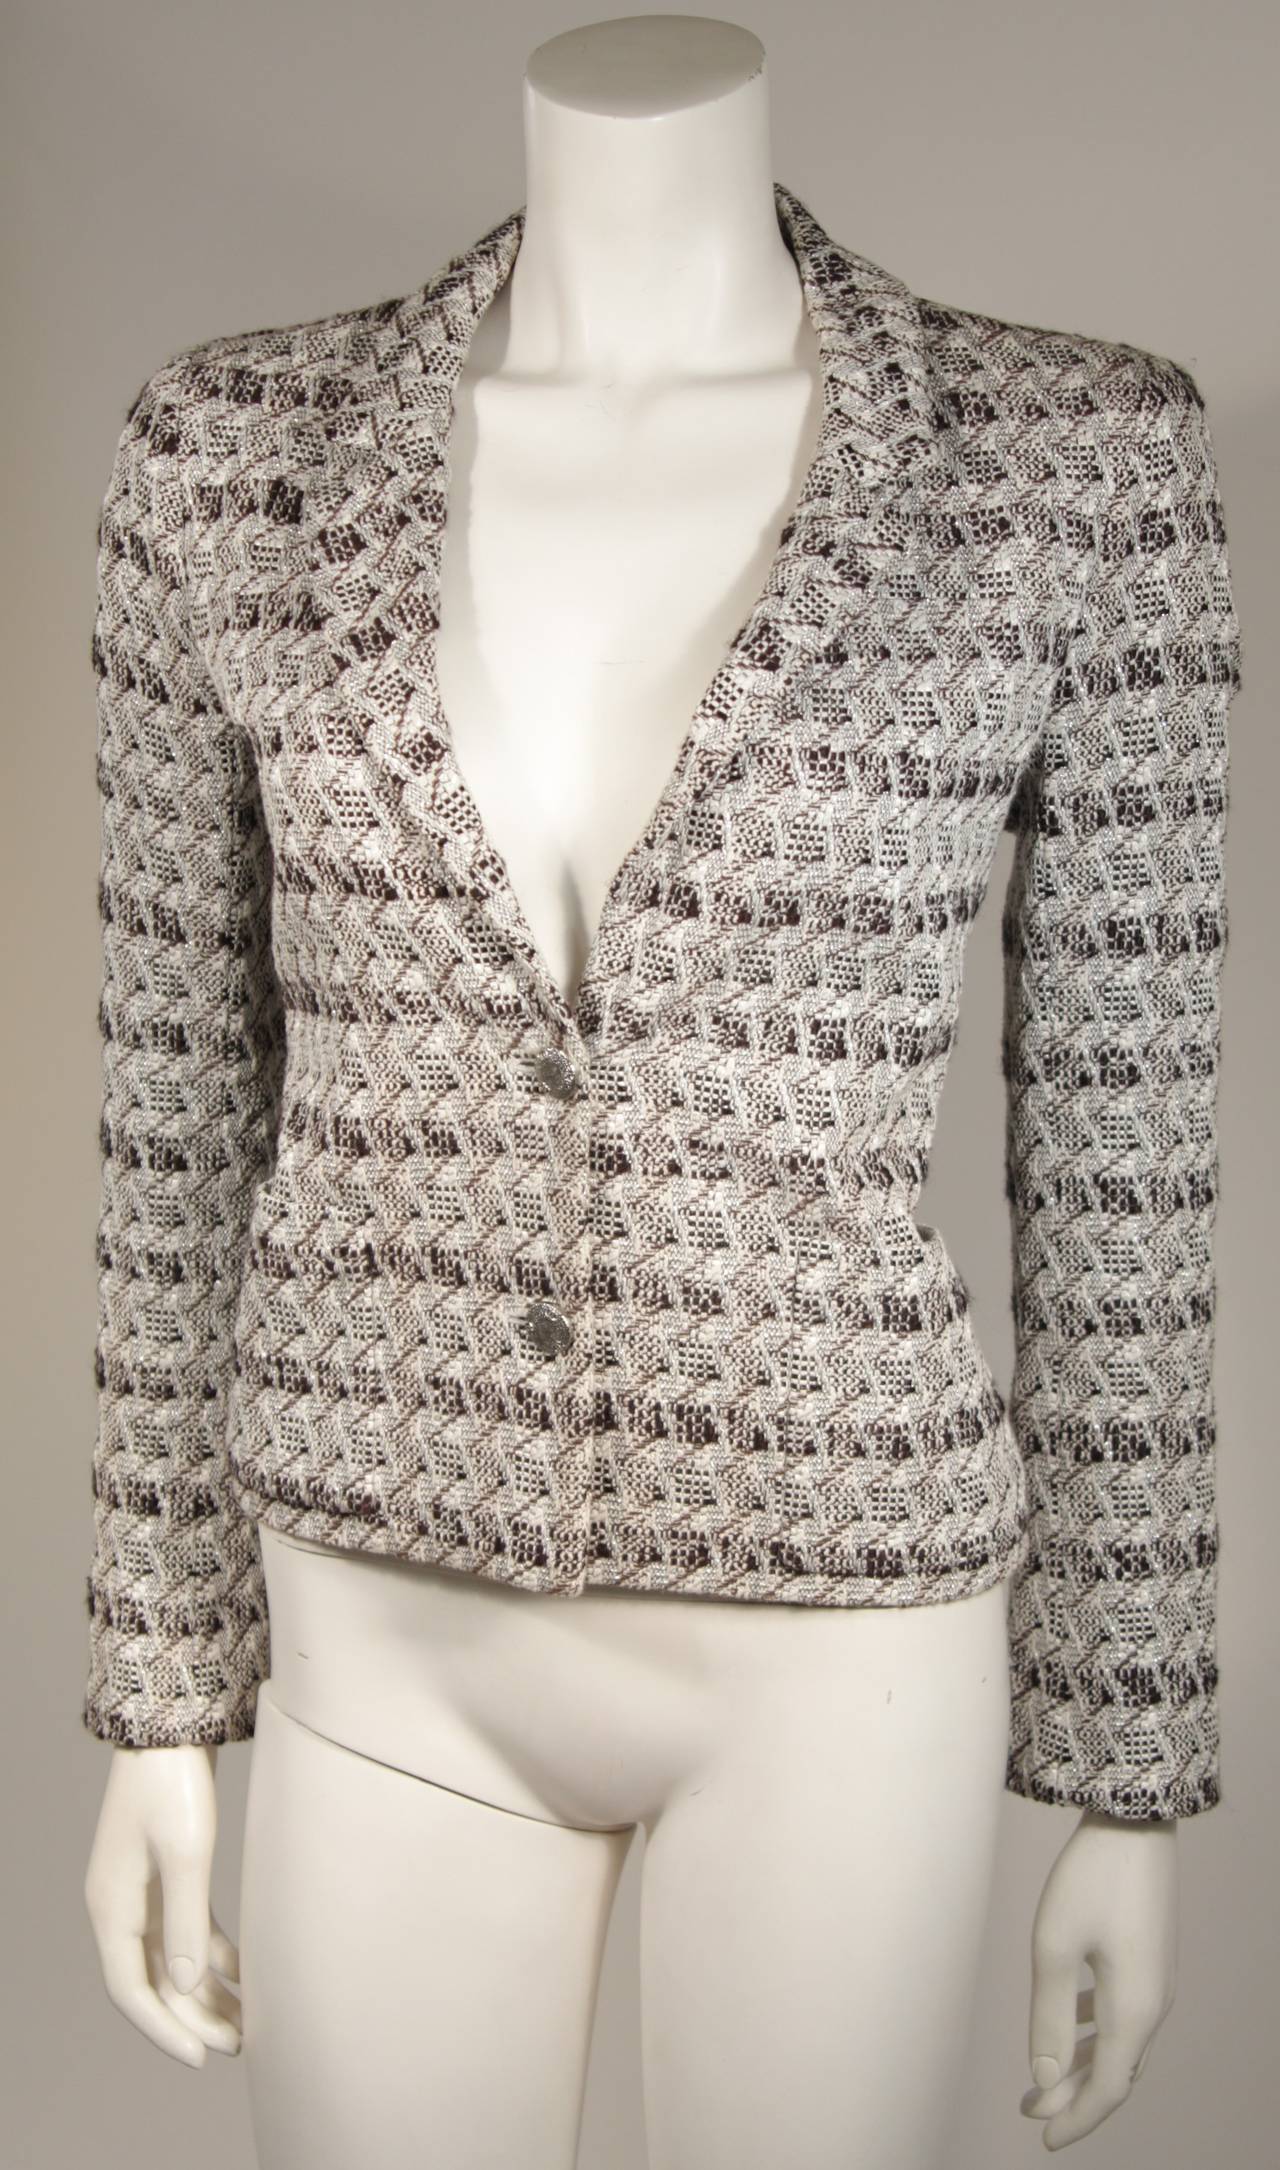 This Chanel jacket is available for viewing at our Beverly Hills Boutique. The blazer is composed of a white, black, and silver metallic fabric. There are center front button closures and two front pockets.

Feel free to inquire about our